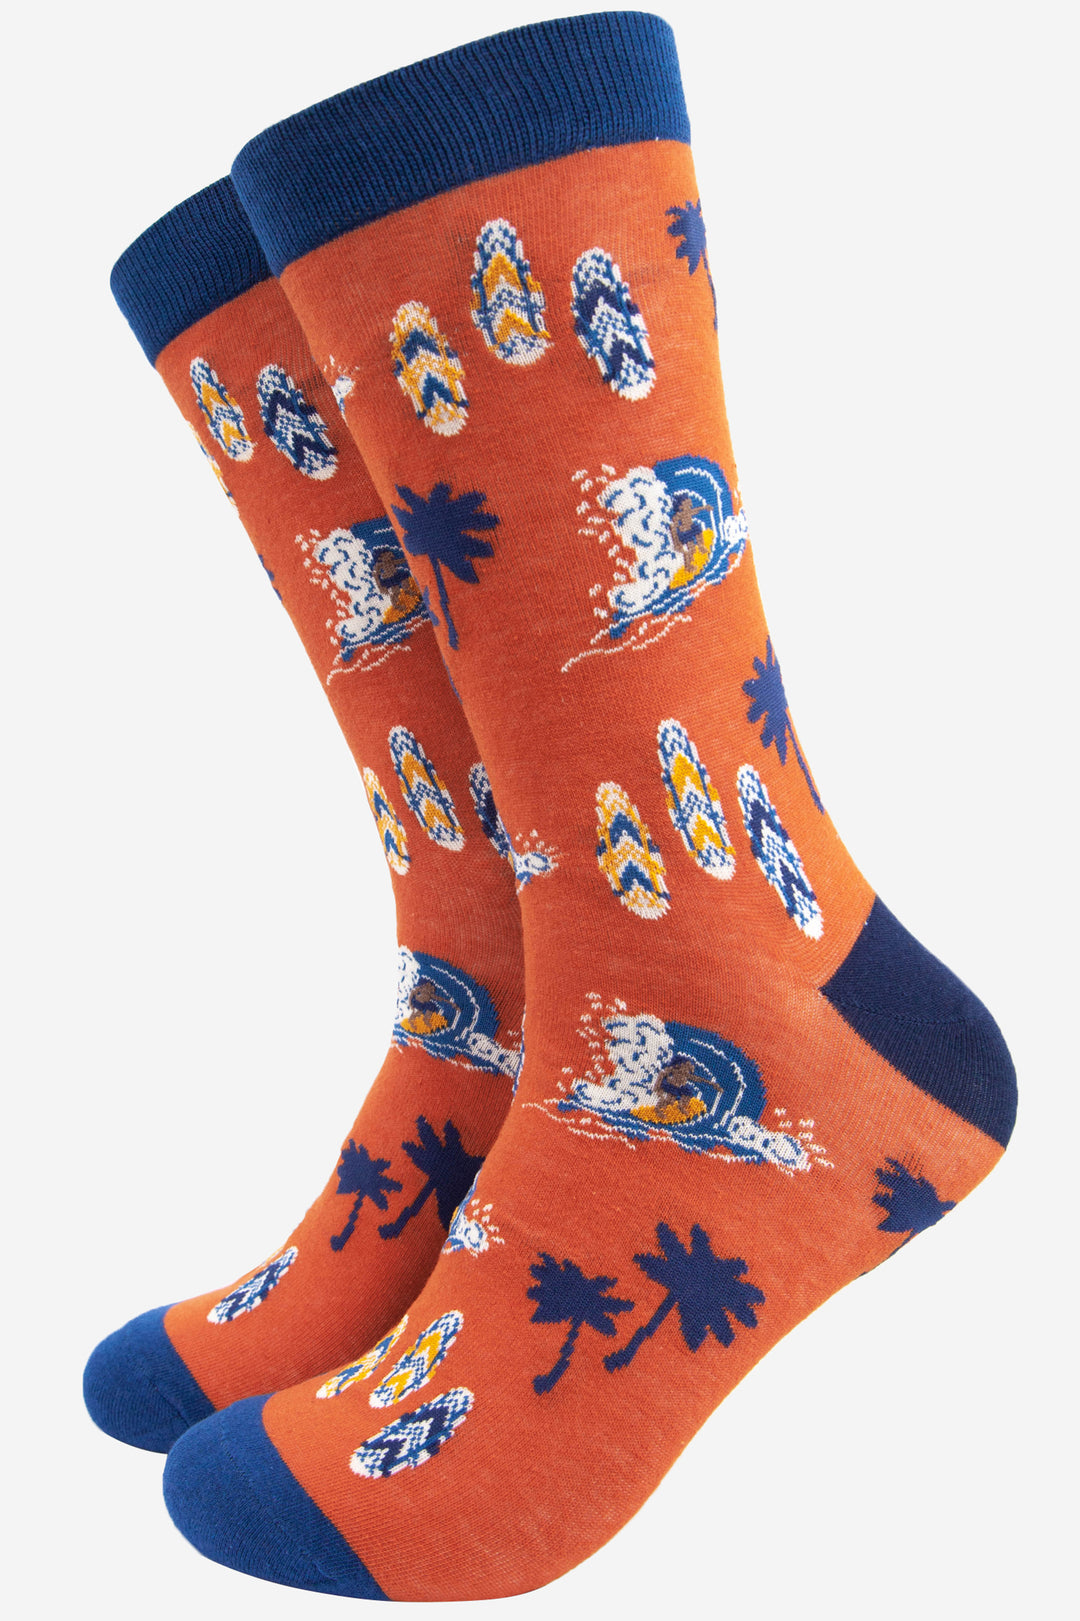 orange and blue dress socks with a pattern showing a surfer , surfboards and palm trees